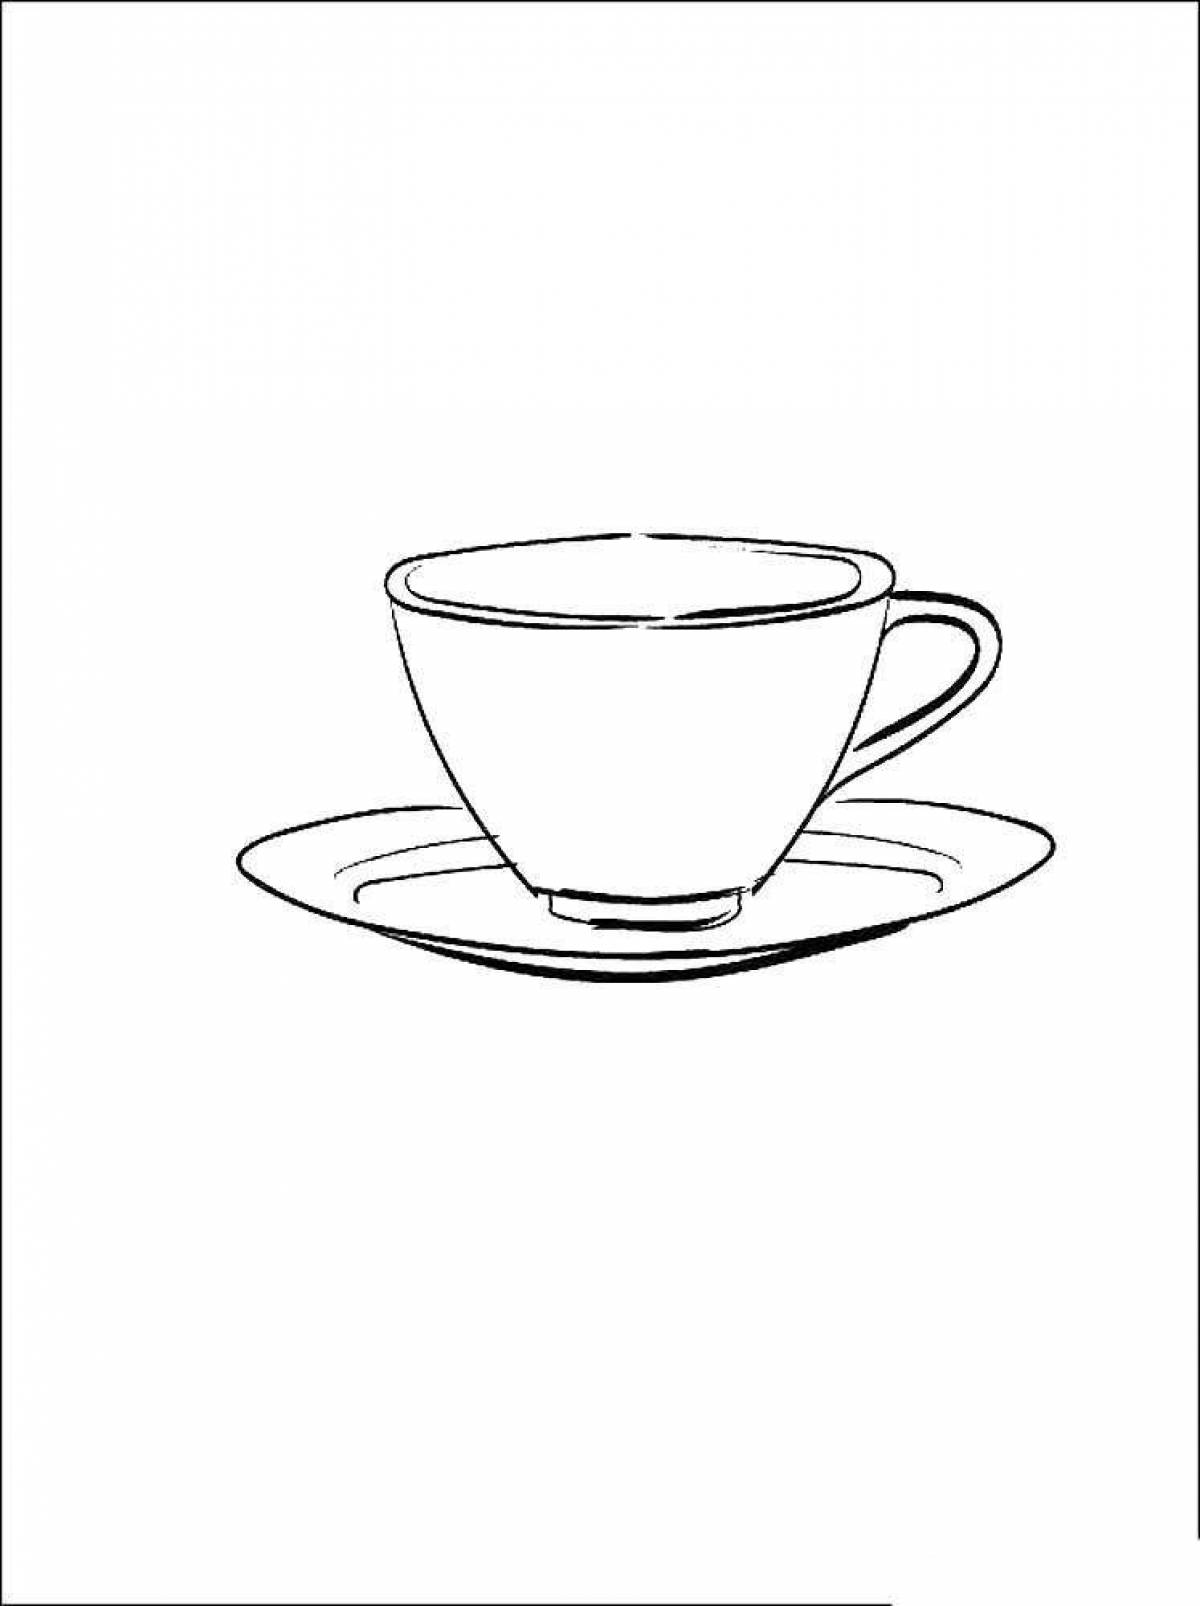 Coloring book funny cup and saucer